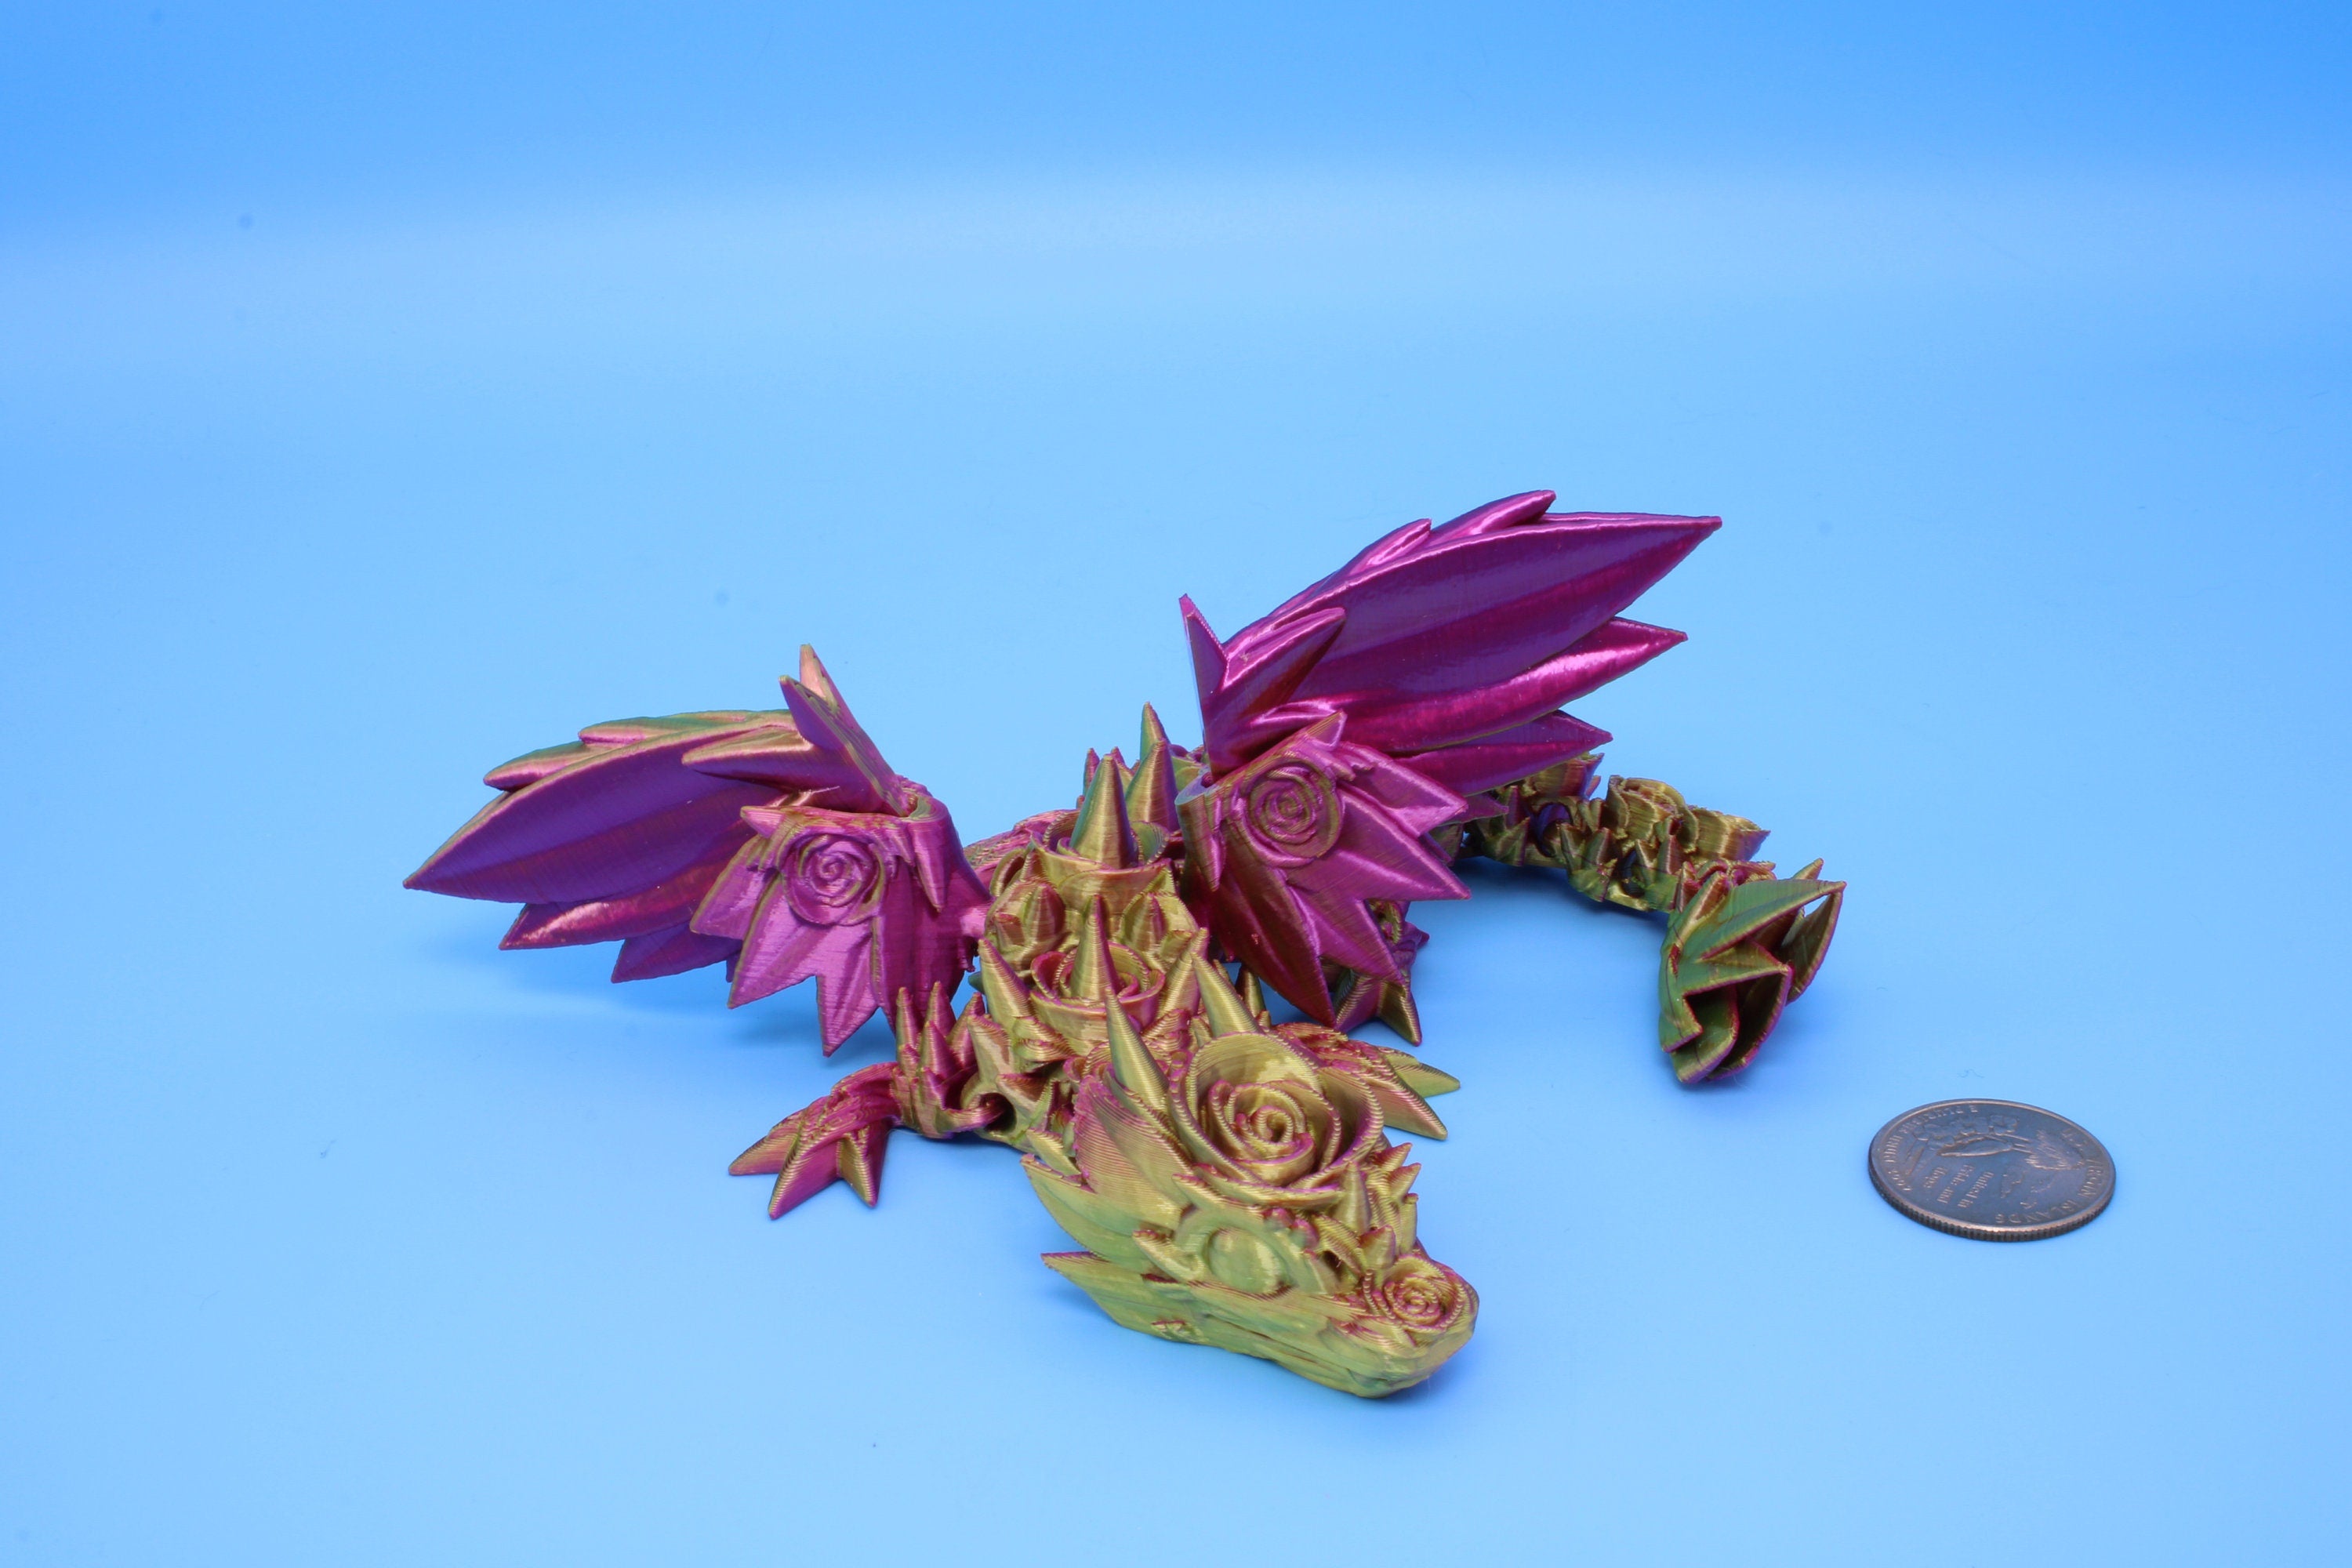 Baby Rose Wing Dragon | 3D Printed | Fidget | Flexi Toy 8.5 in. | Stress Relief Gift